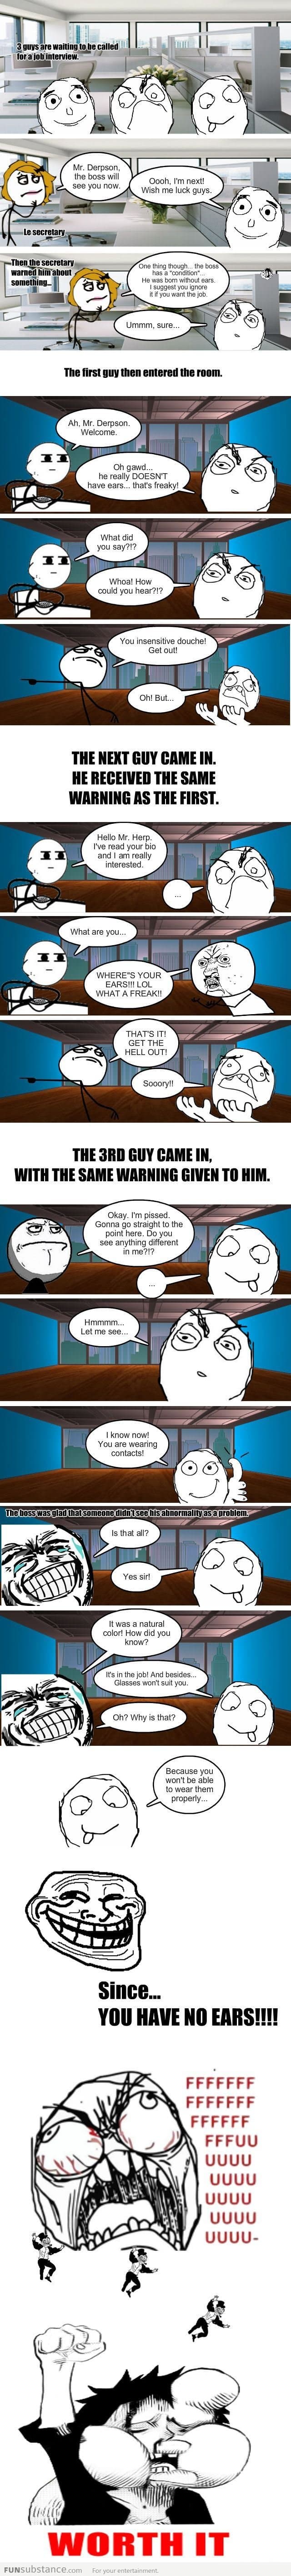 Trolling during a job interview